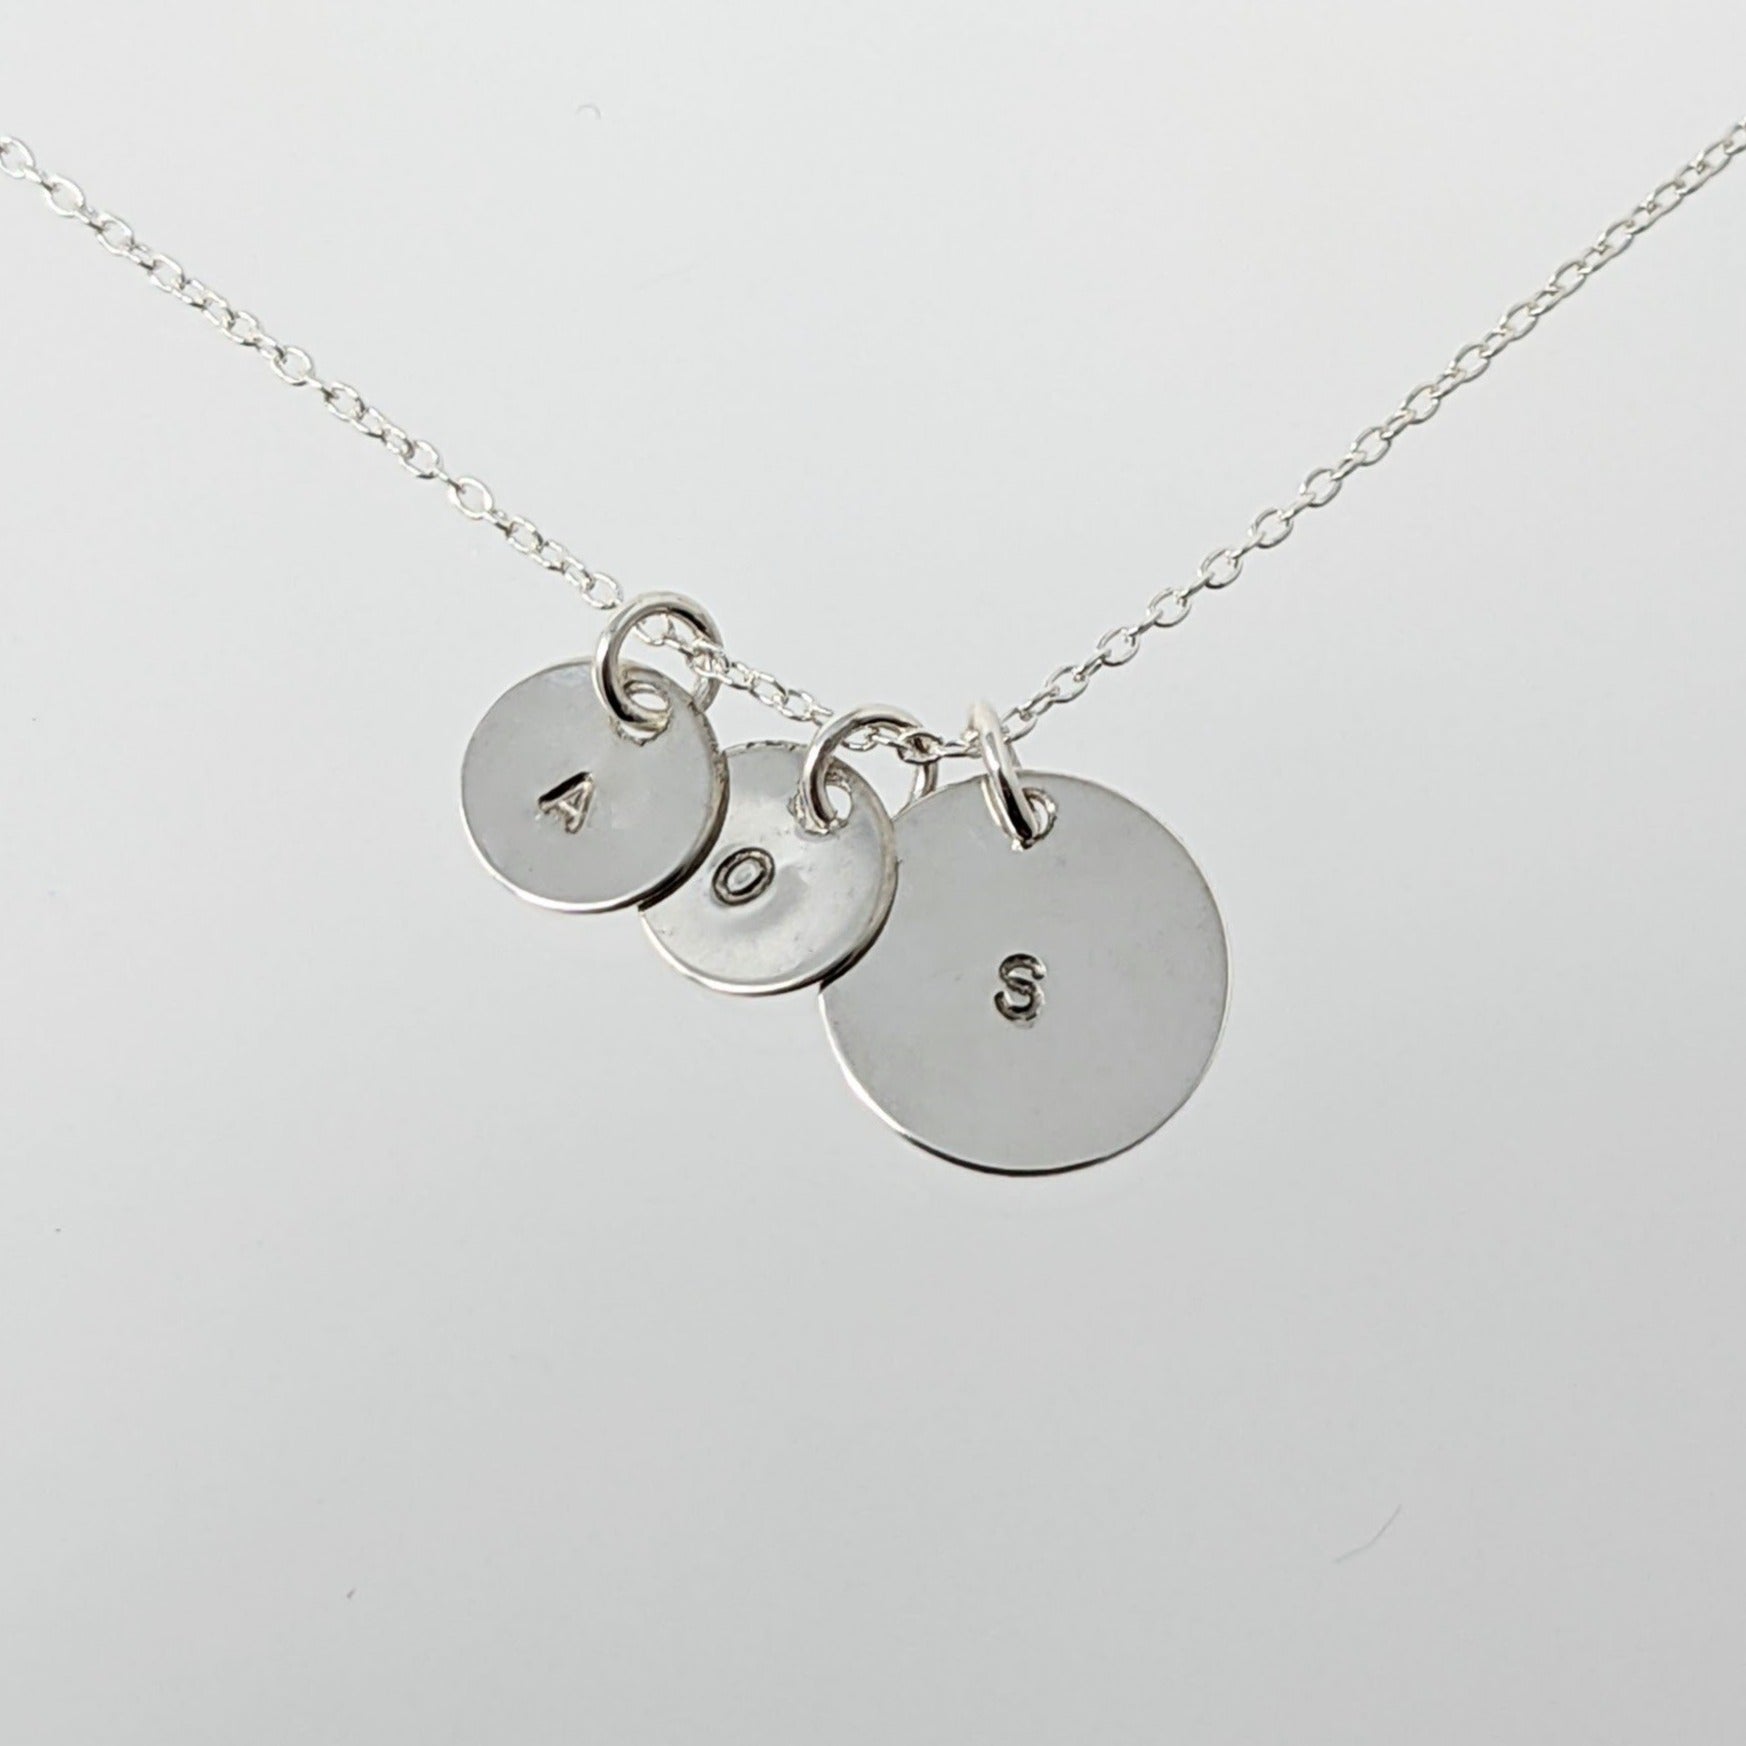 Personalised sterling silver letter disc pendant necklace